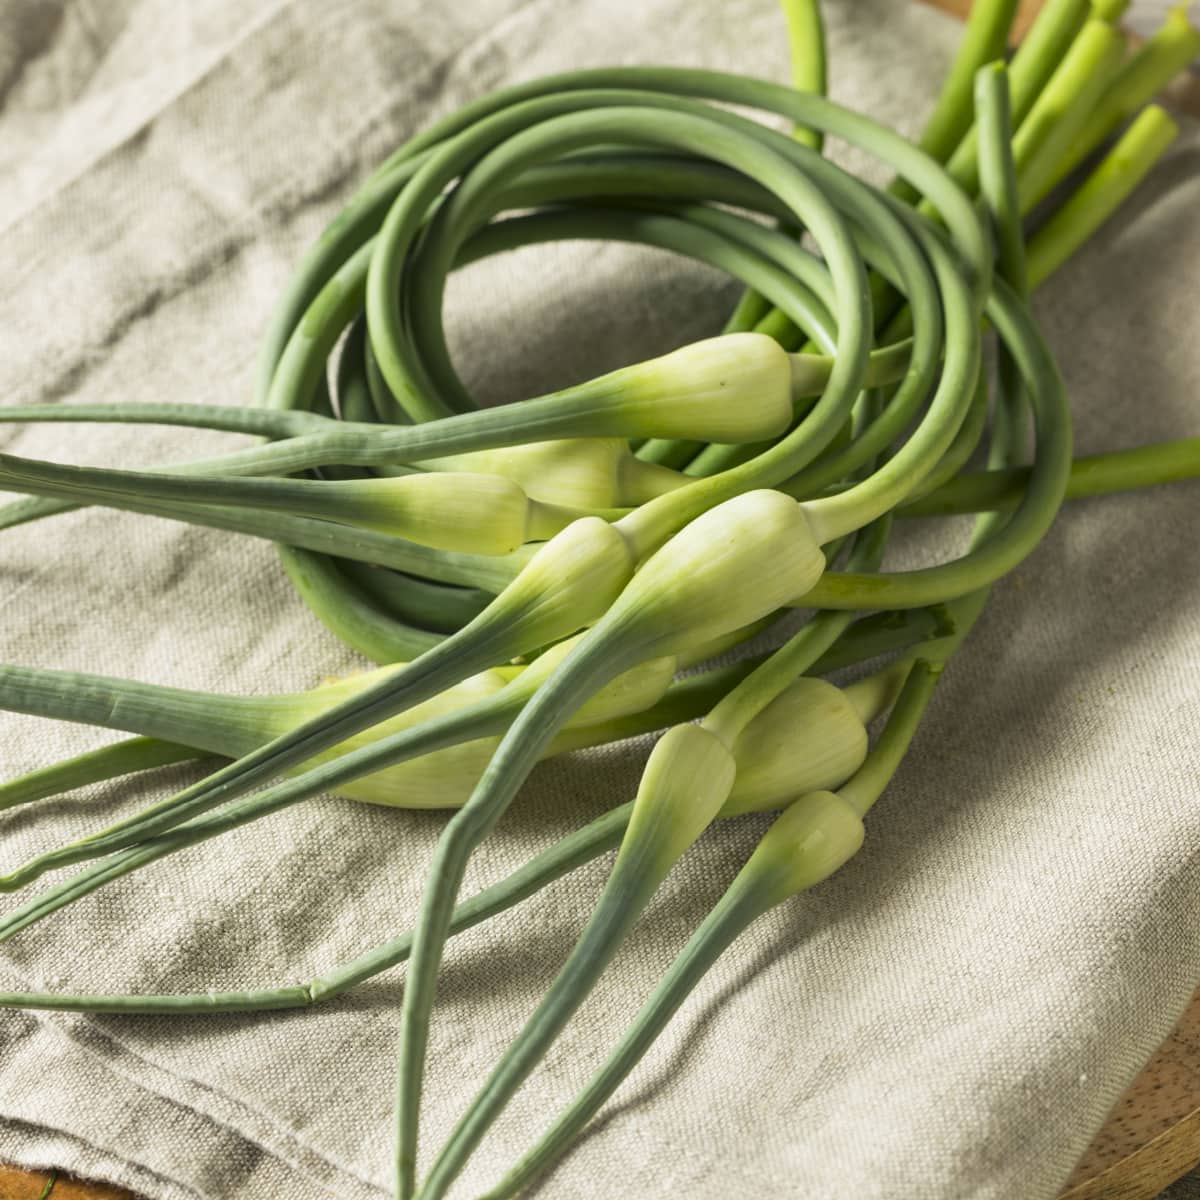 Raw Green Organic Garlic Scapes Ready to Use on a Rustic Cloth